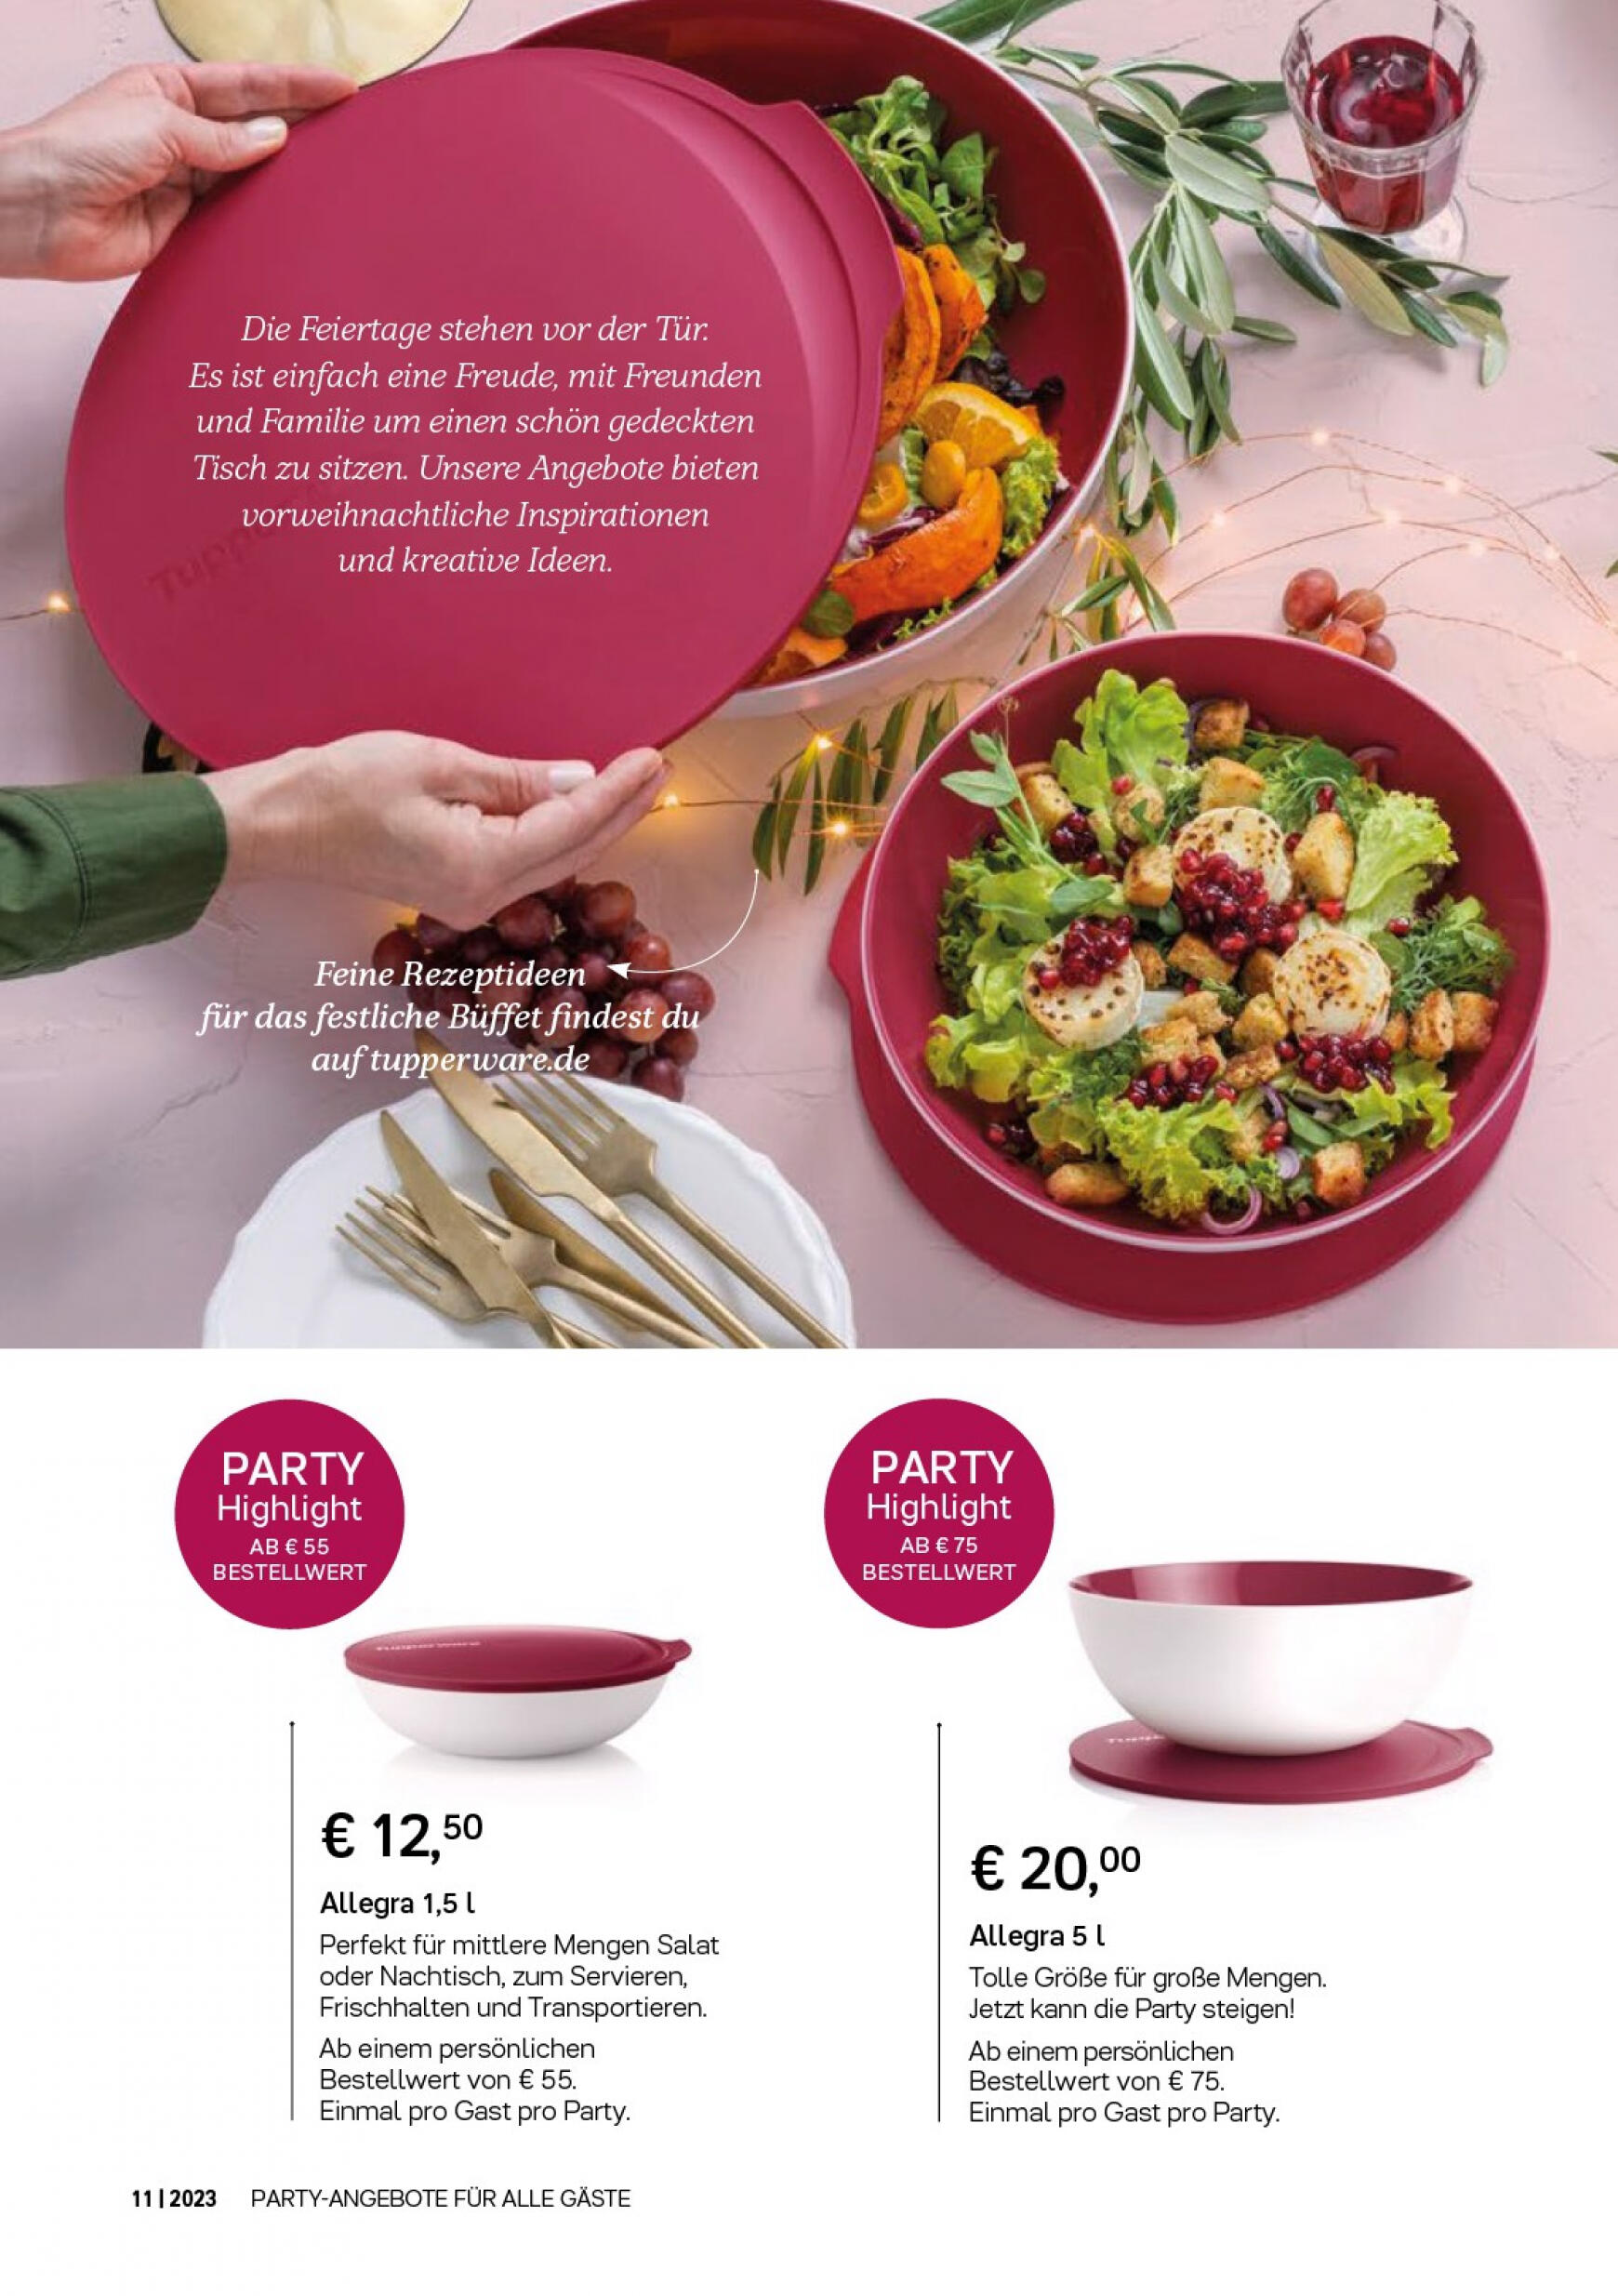 tupperware - Tupperware Online & Party - page: 2